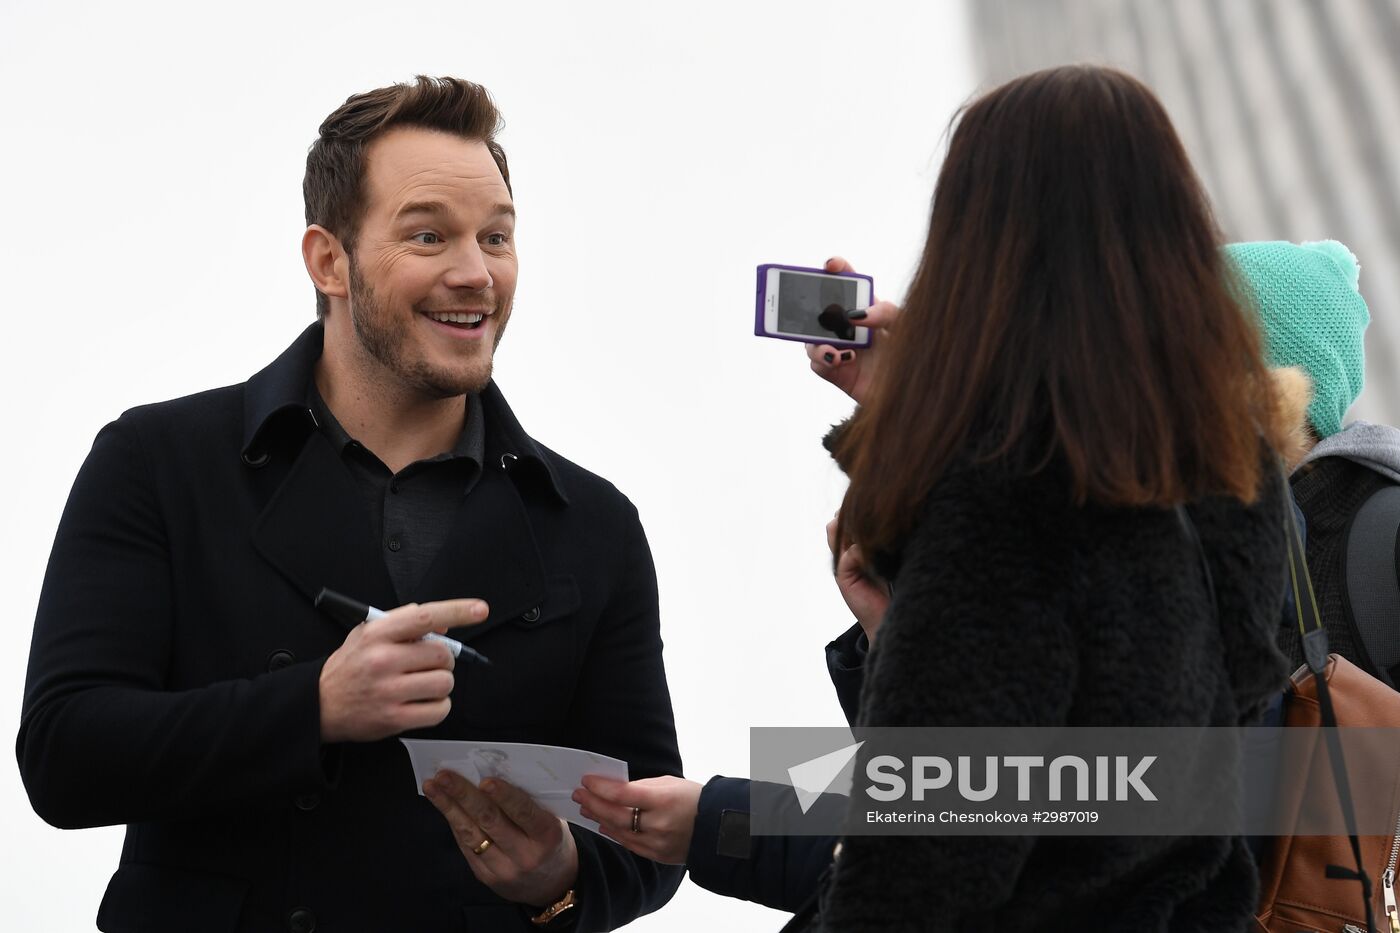 Photo call and news conference with actor Chris Pratt